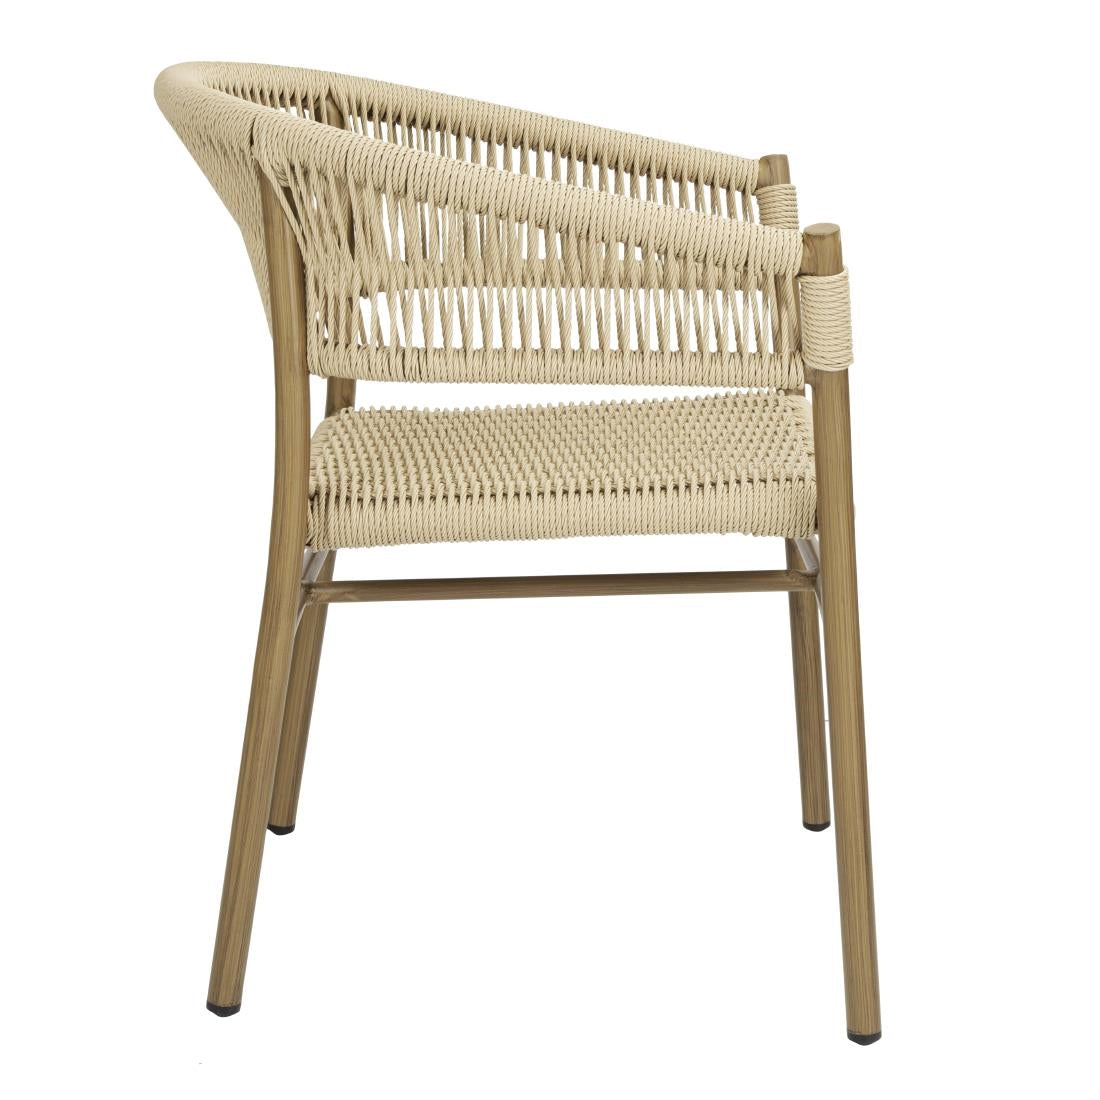 FU532 Bolero Florence Natural Rope Twist Wicker Chairs (Pack of 2)